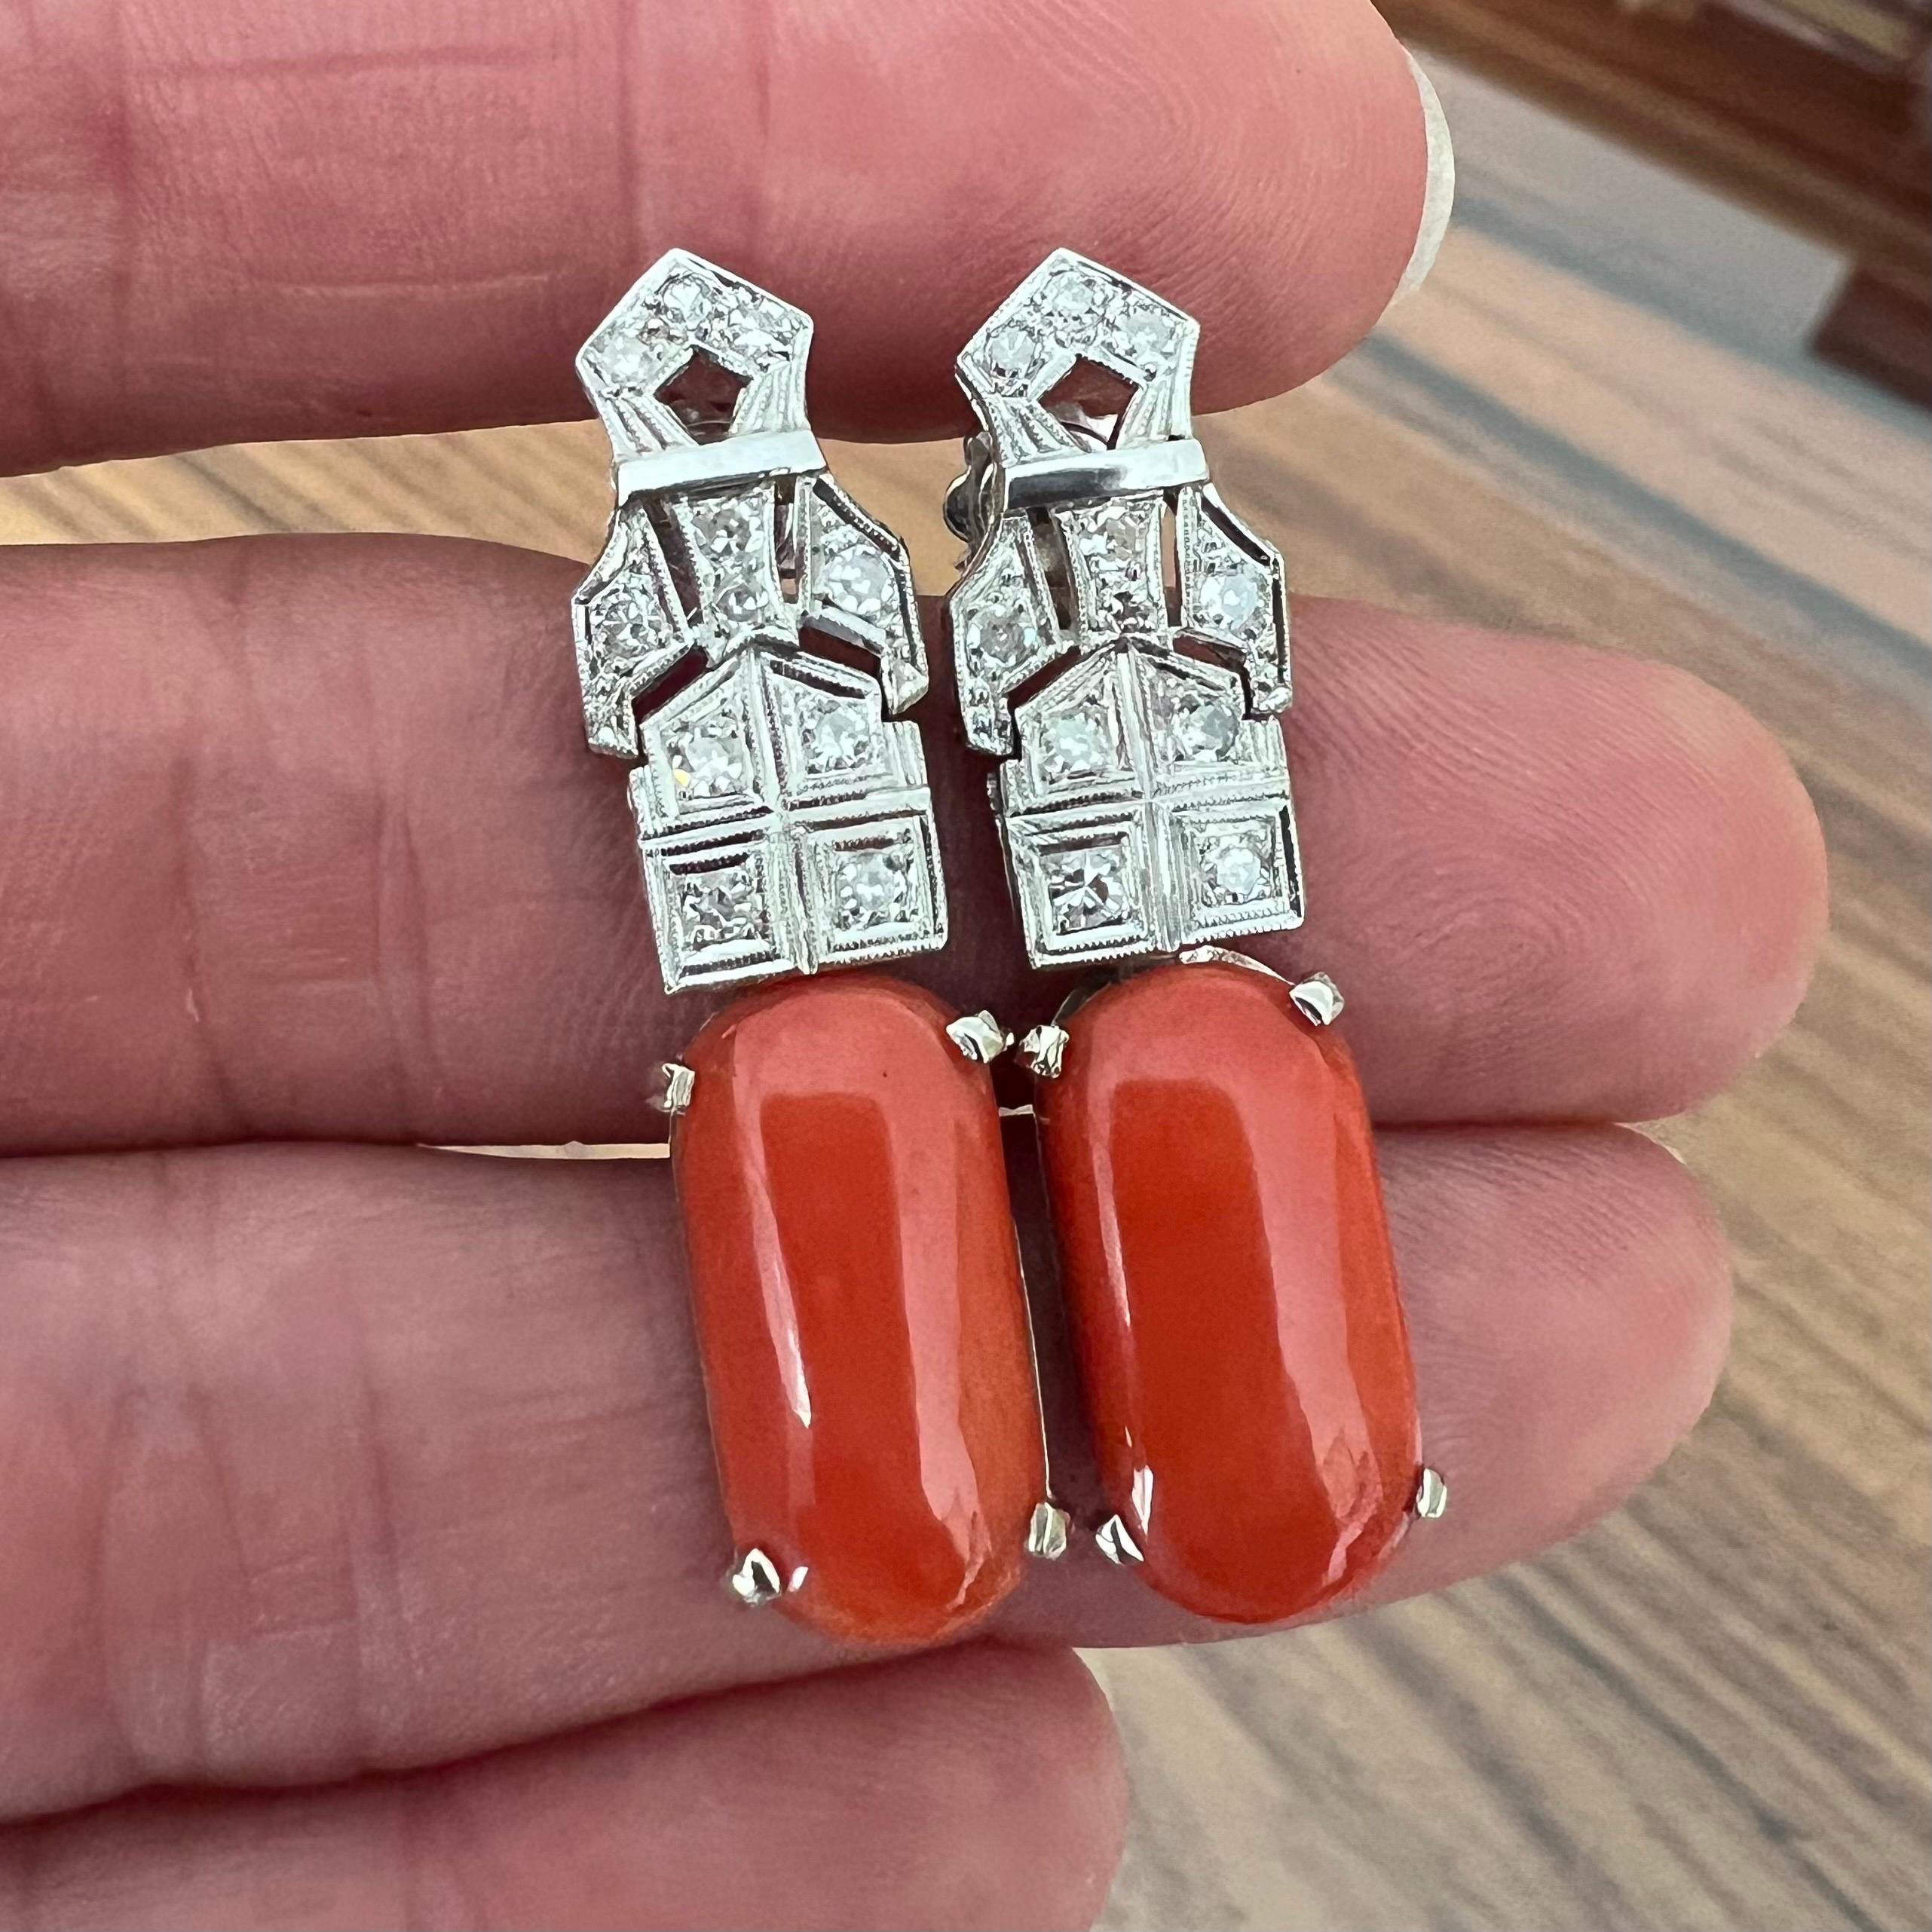 A pair of 18 karat white gold and coral dangle earrings. The earrings are set with eleven octagonal cut diamonds with a dropper of a dark red coral cabochon. The earrings are made of 18 karat white gold with super clear diamonds of approximately